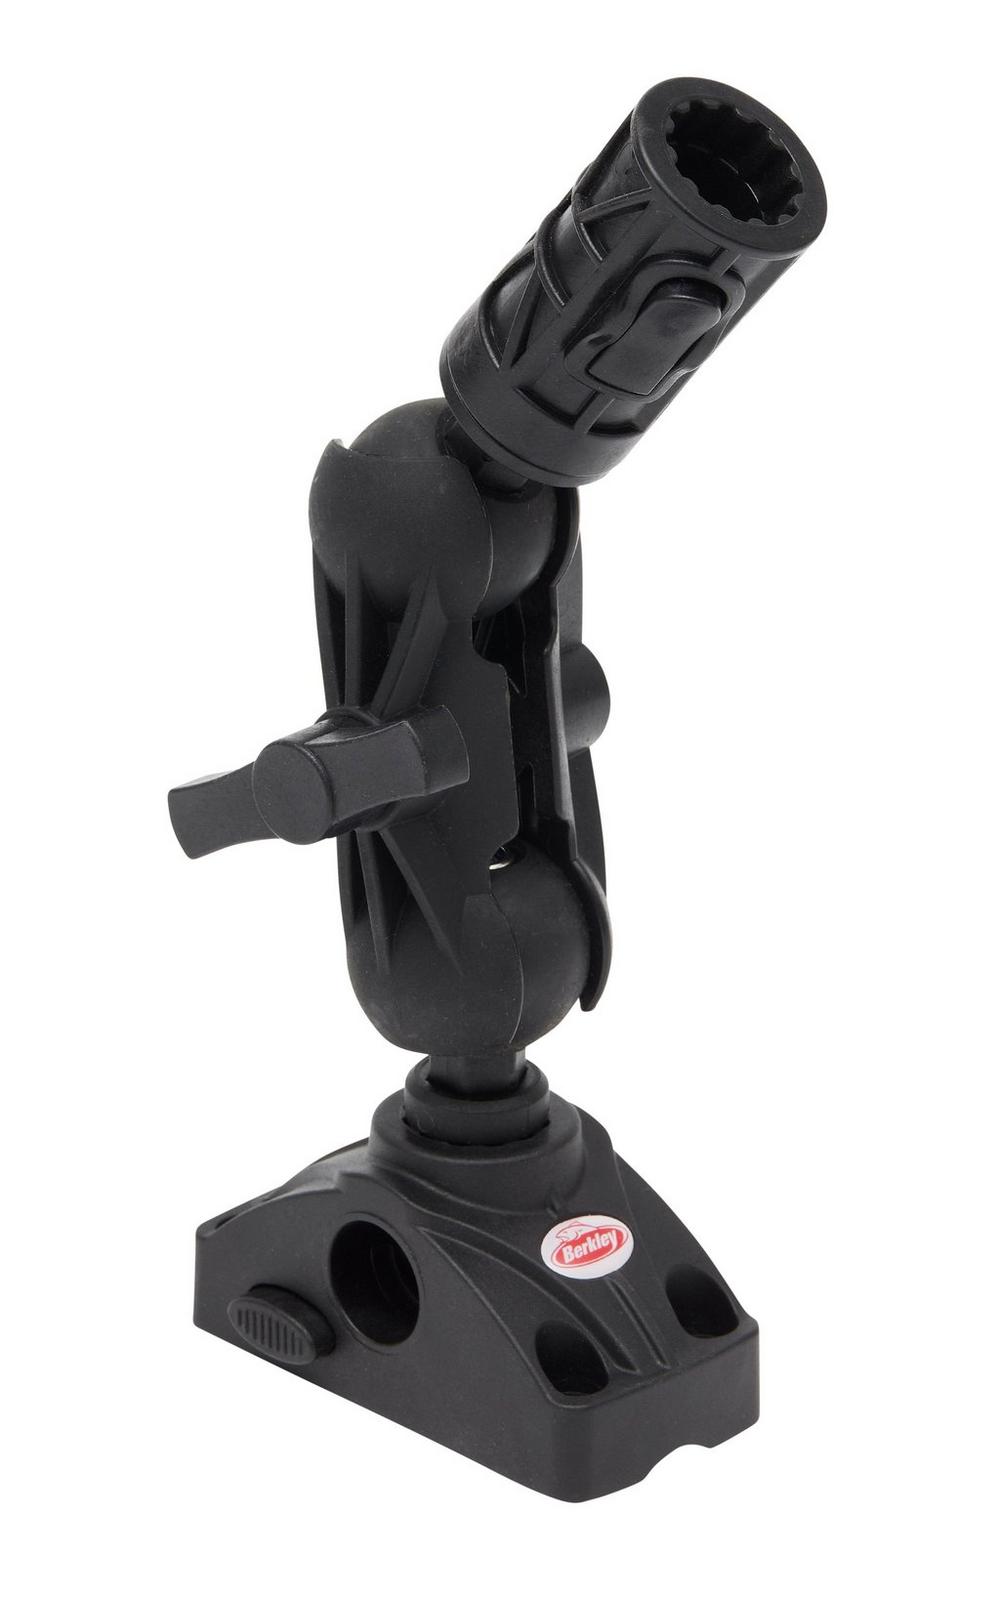 Support Berkley Ball M. System With Quick Release Lock